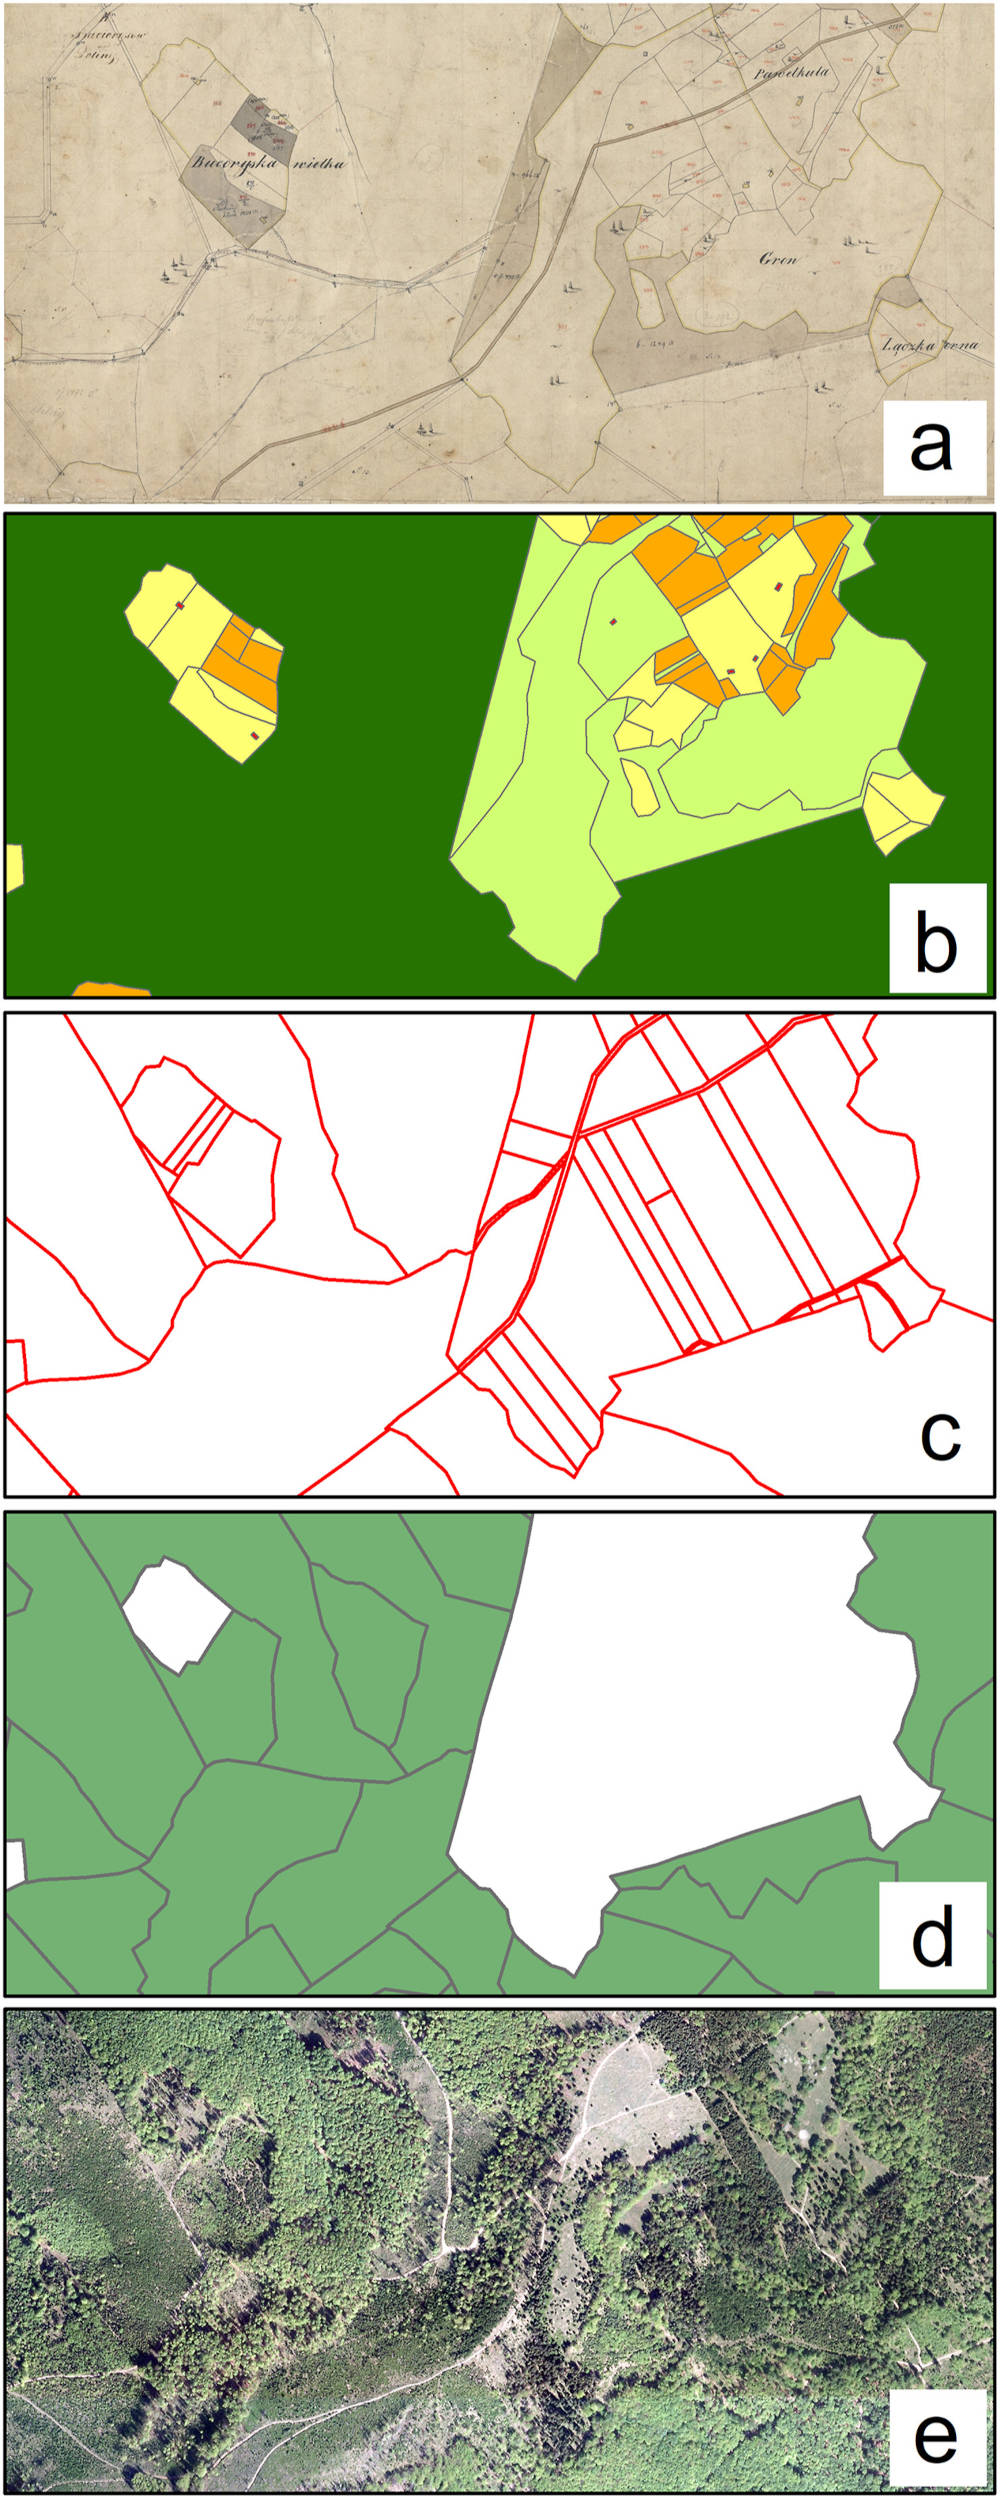 Cartographical materials: original Austrian cadastral map (a), digitized Austrian cadastral map (b), the Surveyor General of Poland's Cadastral Map (c), the Digital Forest Map (d), contemporary land cover on the orthophotomap (e). Source: own elaboration based on data used with permission from the National Archive in Katowice and Head Office of Geodesy and Cartography in Warsaw